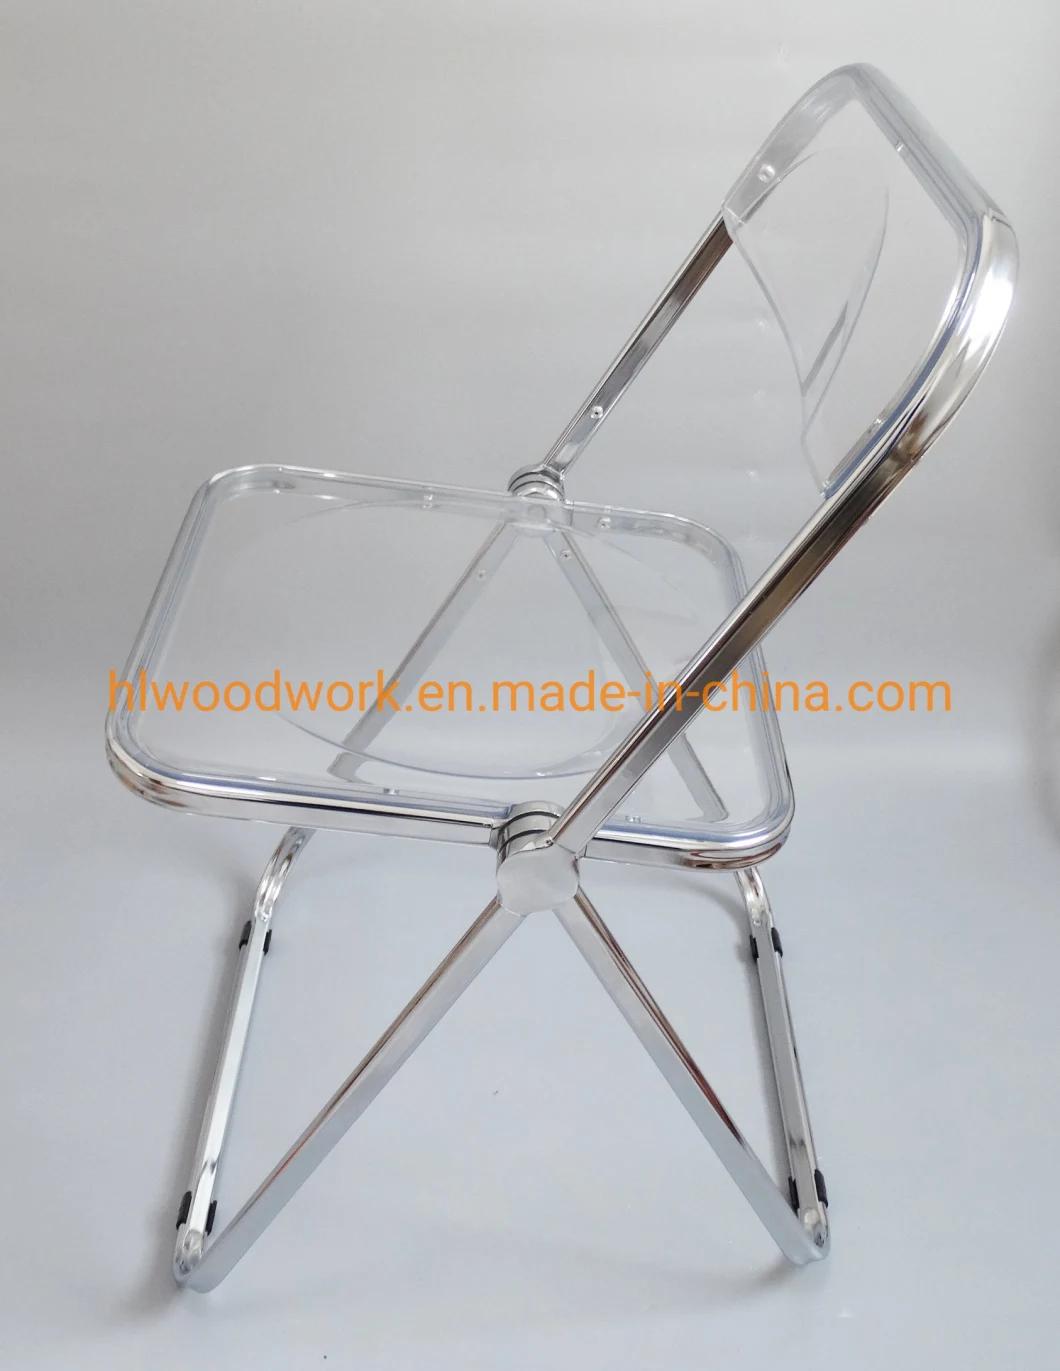 Modern Transparent Black Folding Chair PC Plastic Living Room Seat Chrome Frame Office Bar Dining Leisure Banquet Wedding Meeting Chair Plastic Dining Chair